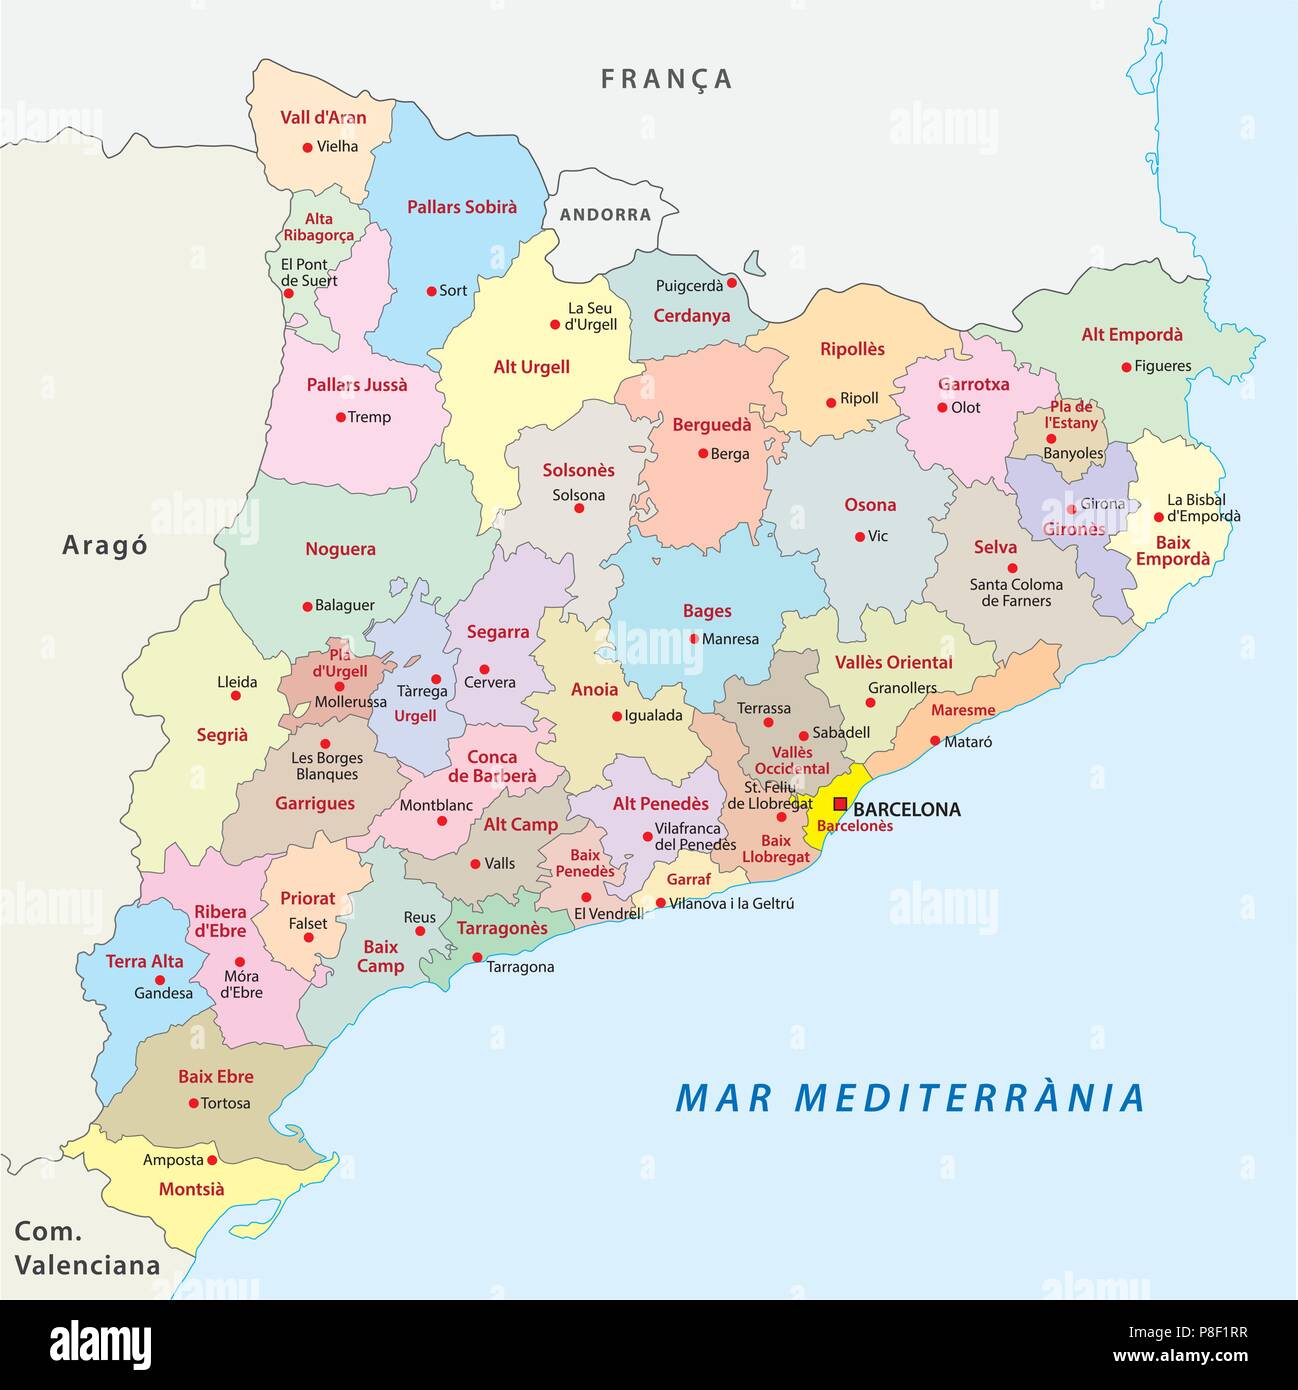 Today's administrative Catalonia occupies part of - Maps on the Web